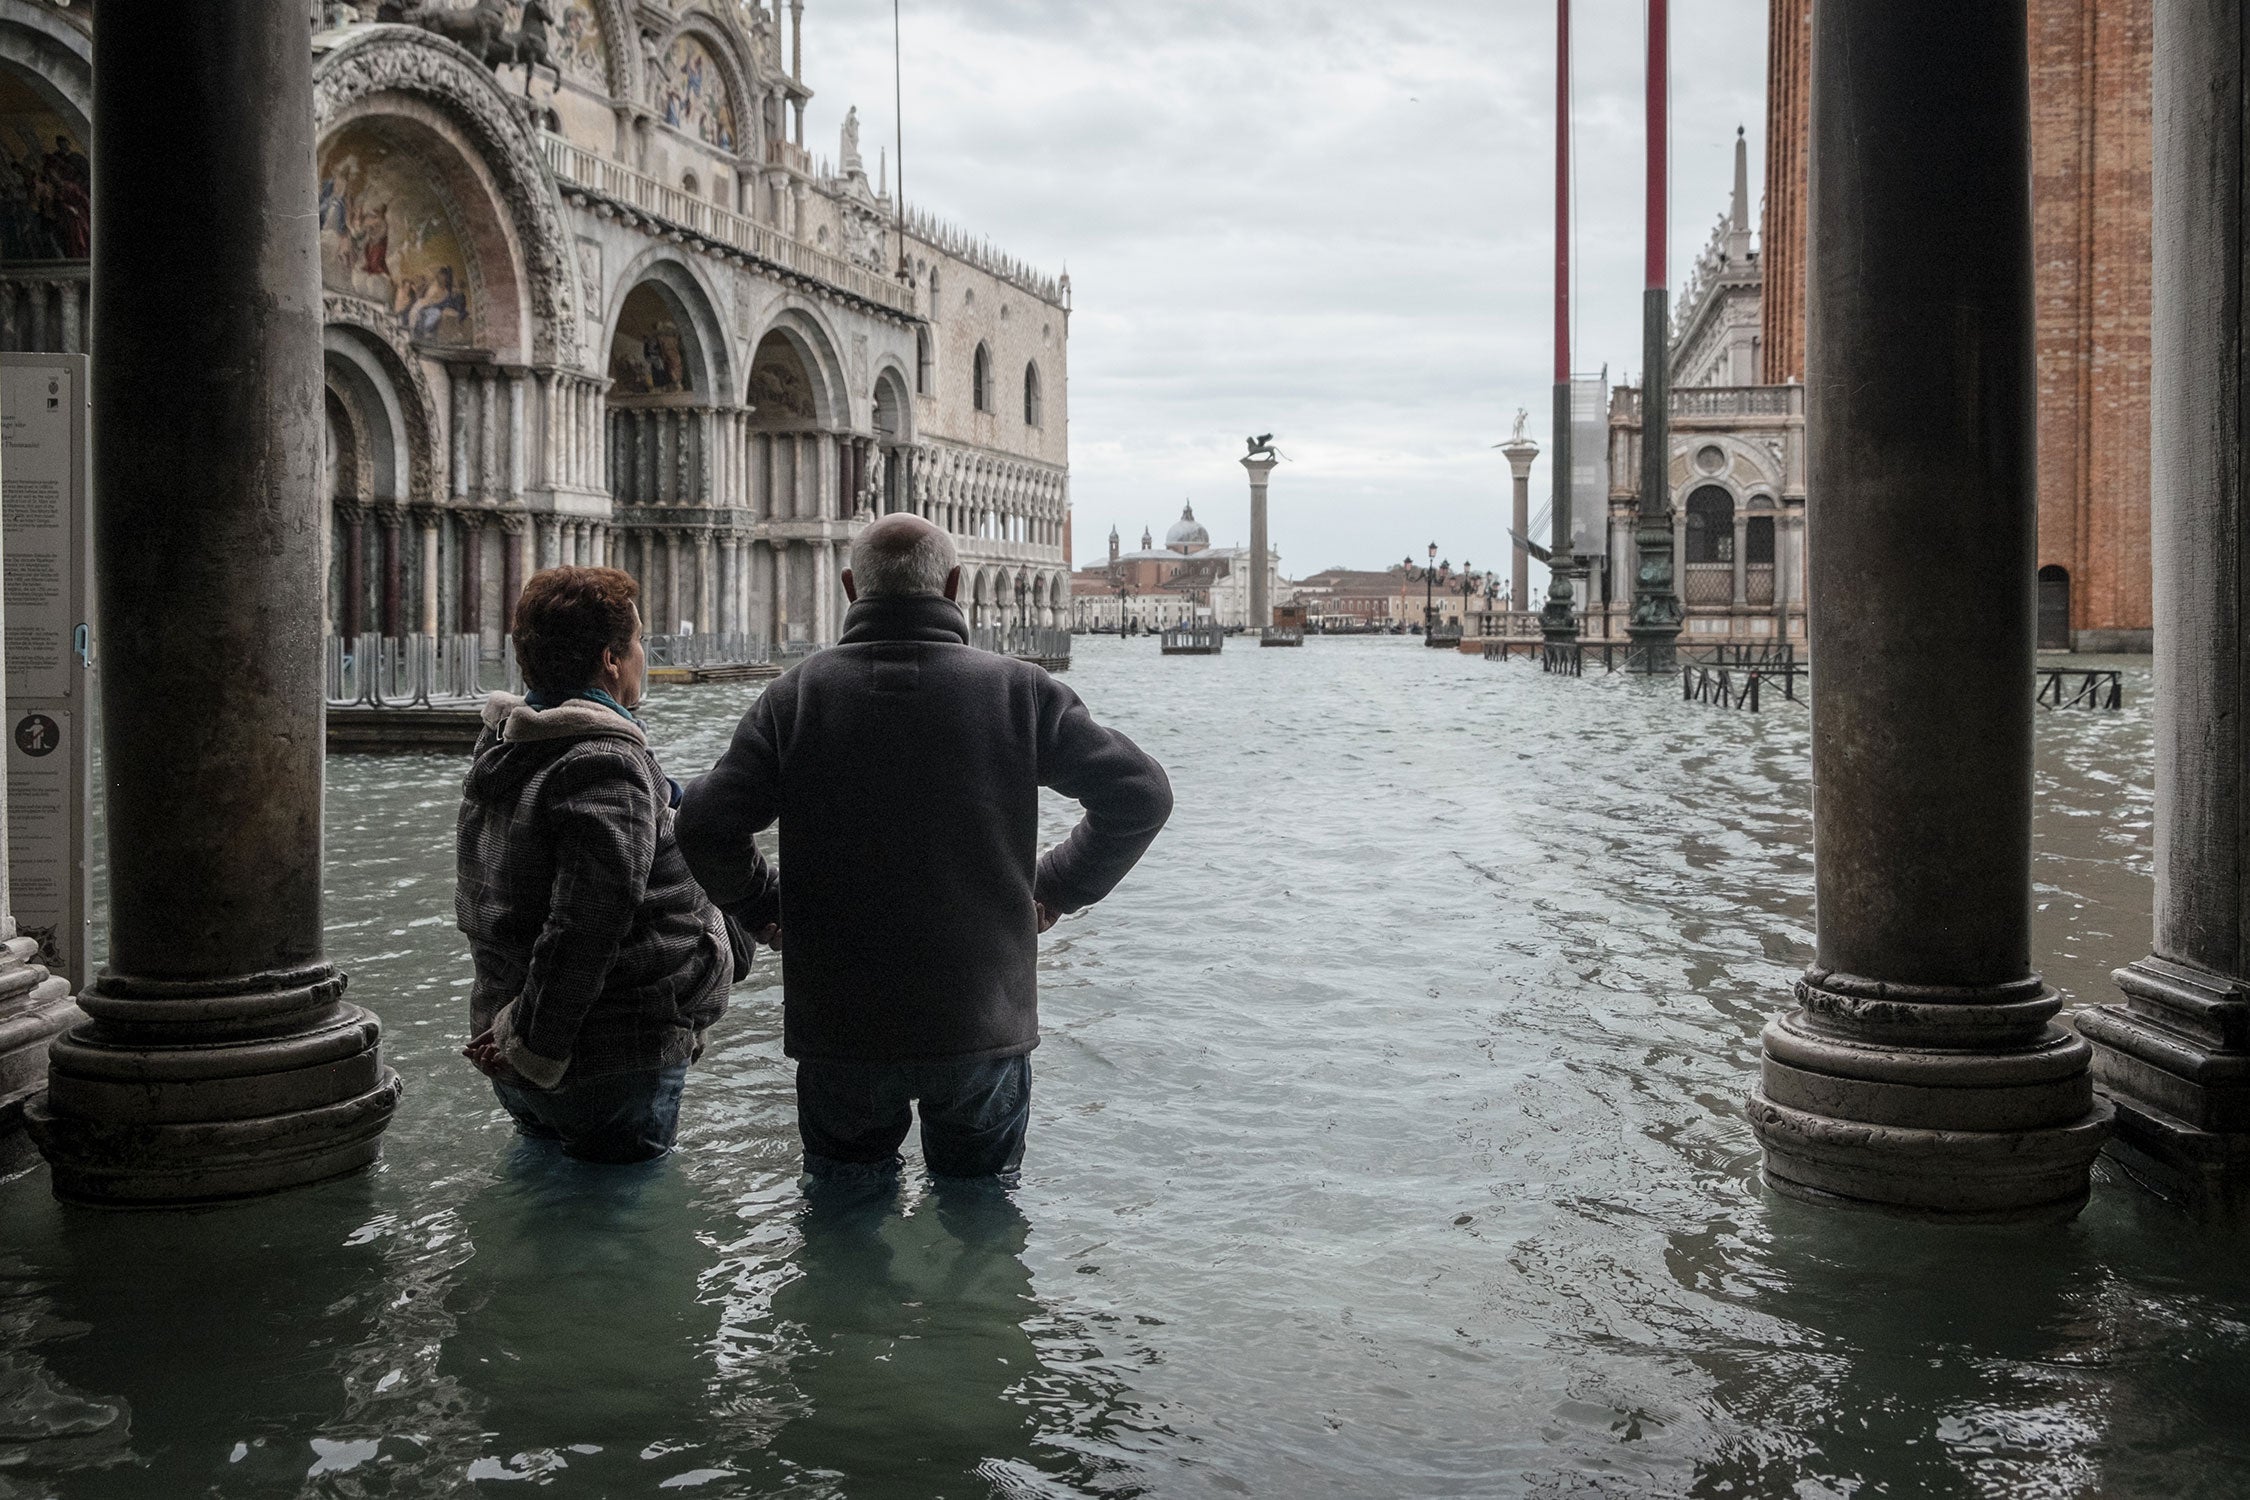 Two people observe a flooded St. Mark's Square, with water reaching their thighs, Nov 15th 2019, Venice.